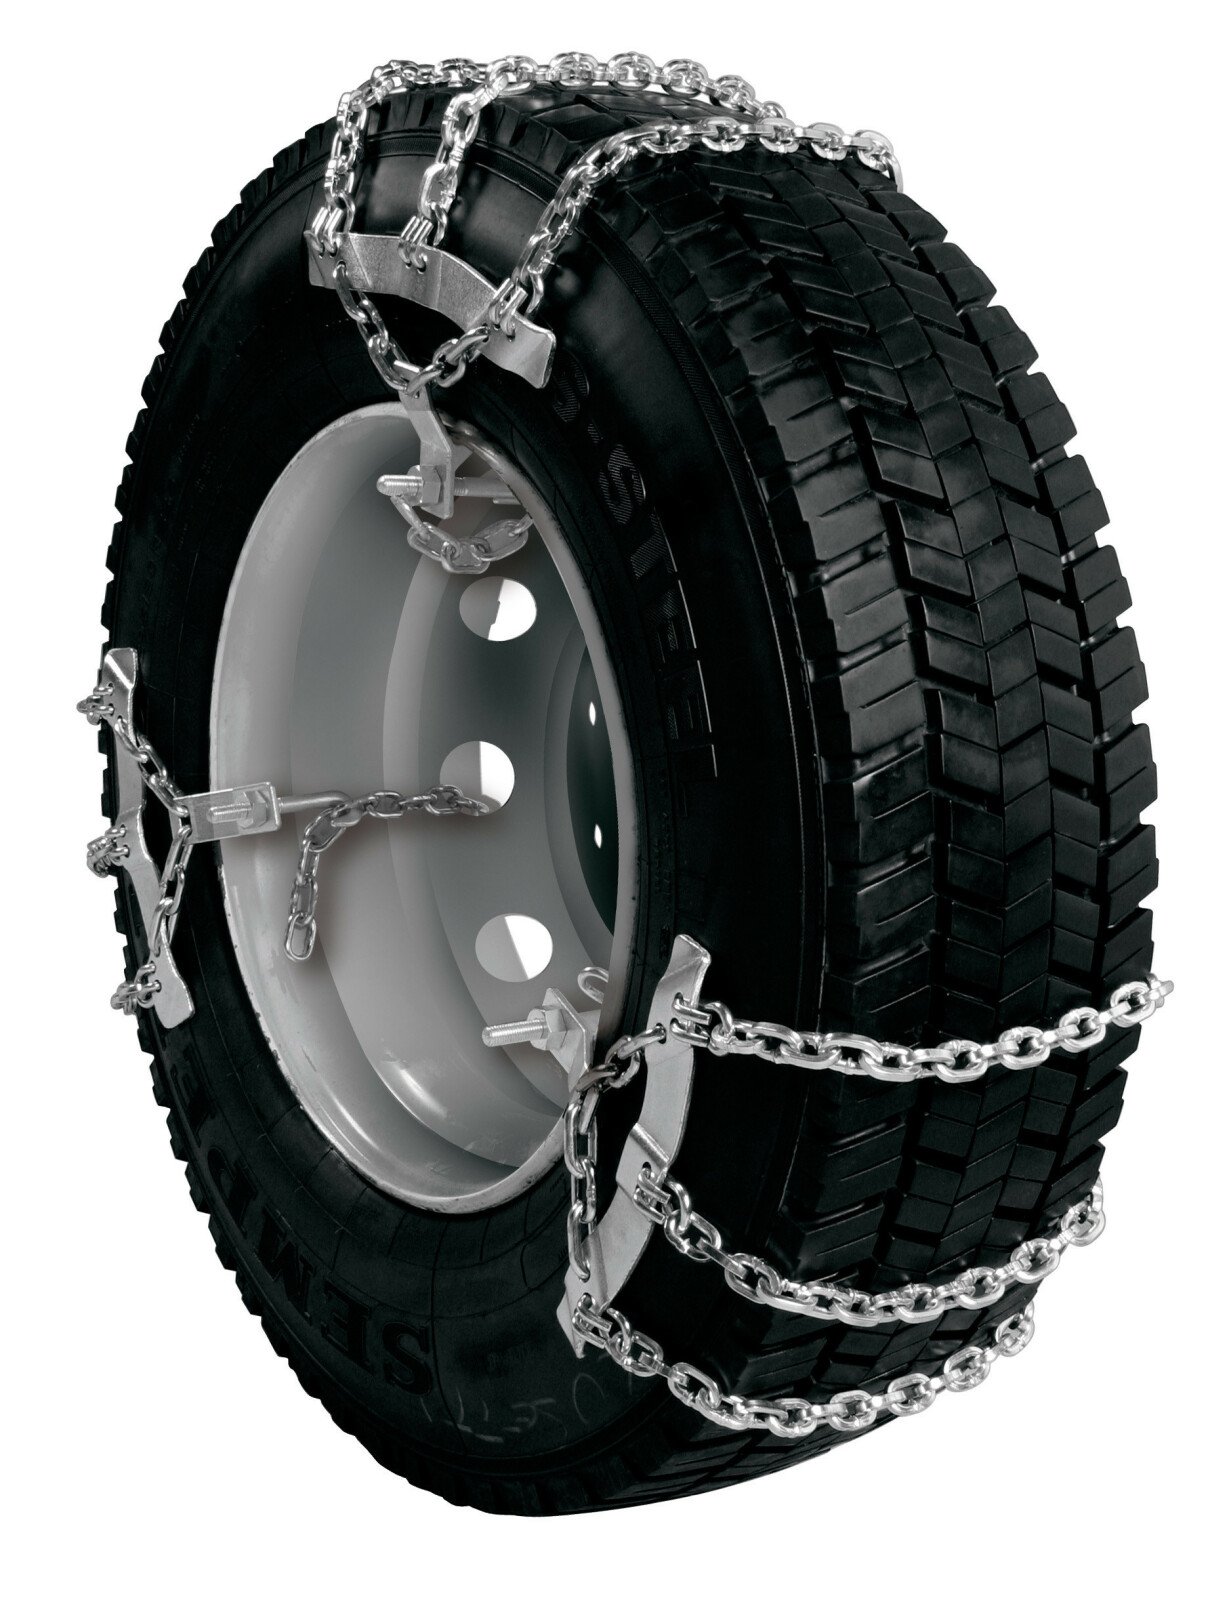 Track sector chains for trucks - S-2 thumb